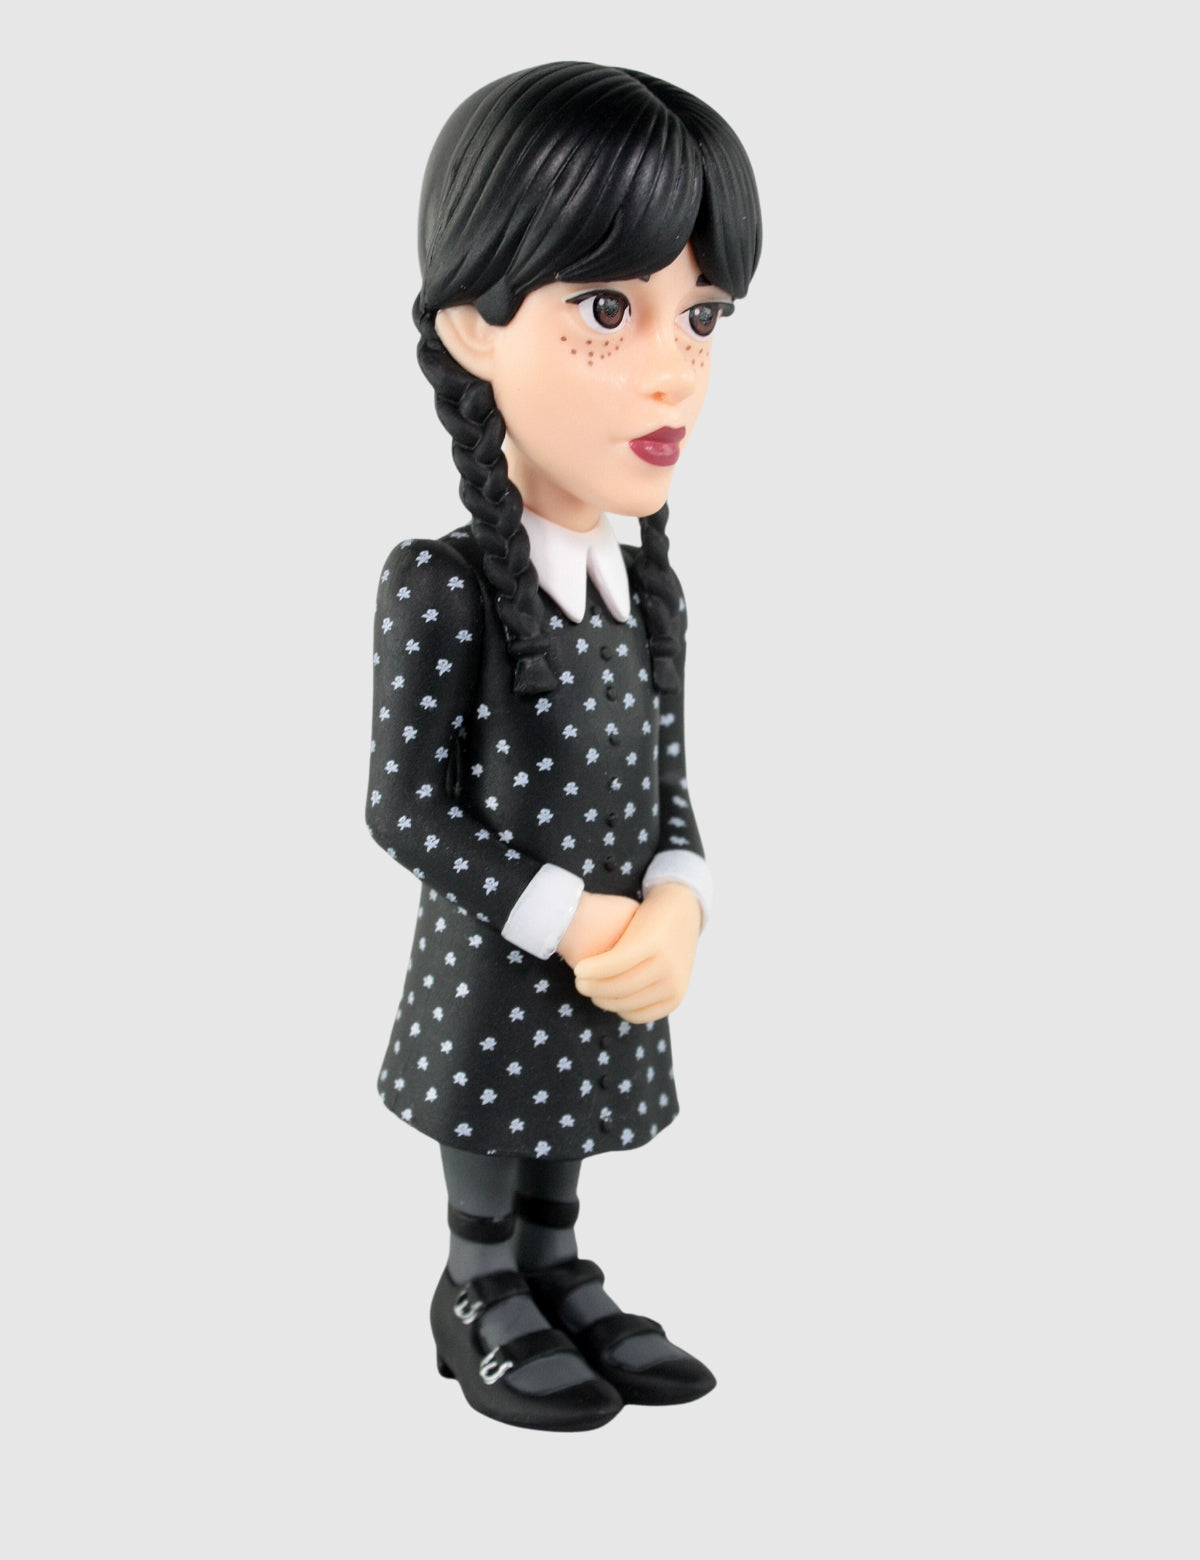  Minix Wednesday Wednesday Addams #113 Collectable Figure 12 cm  : Arts, Crafts & Sewing